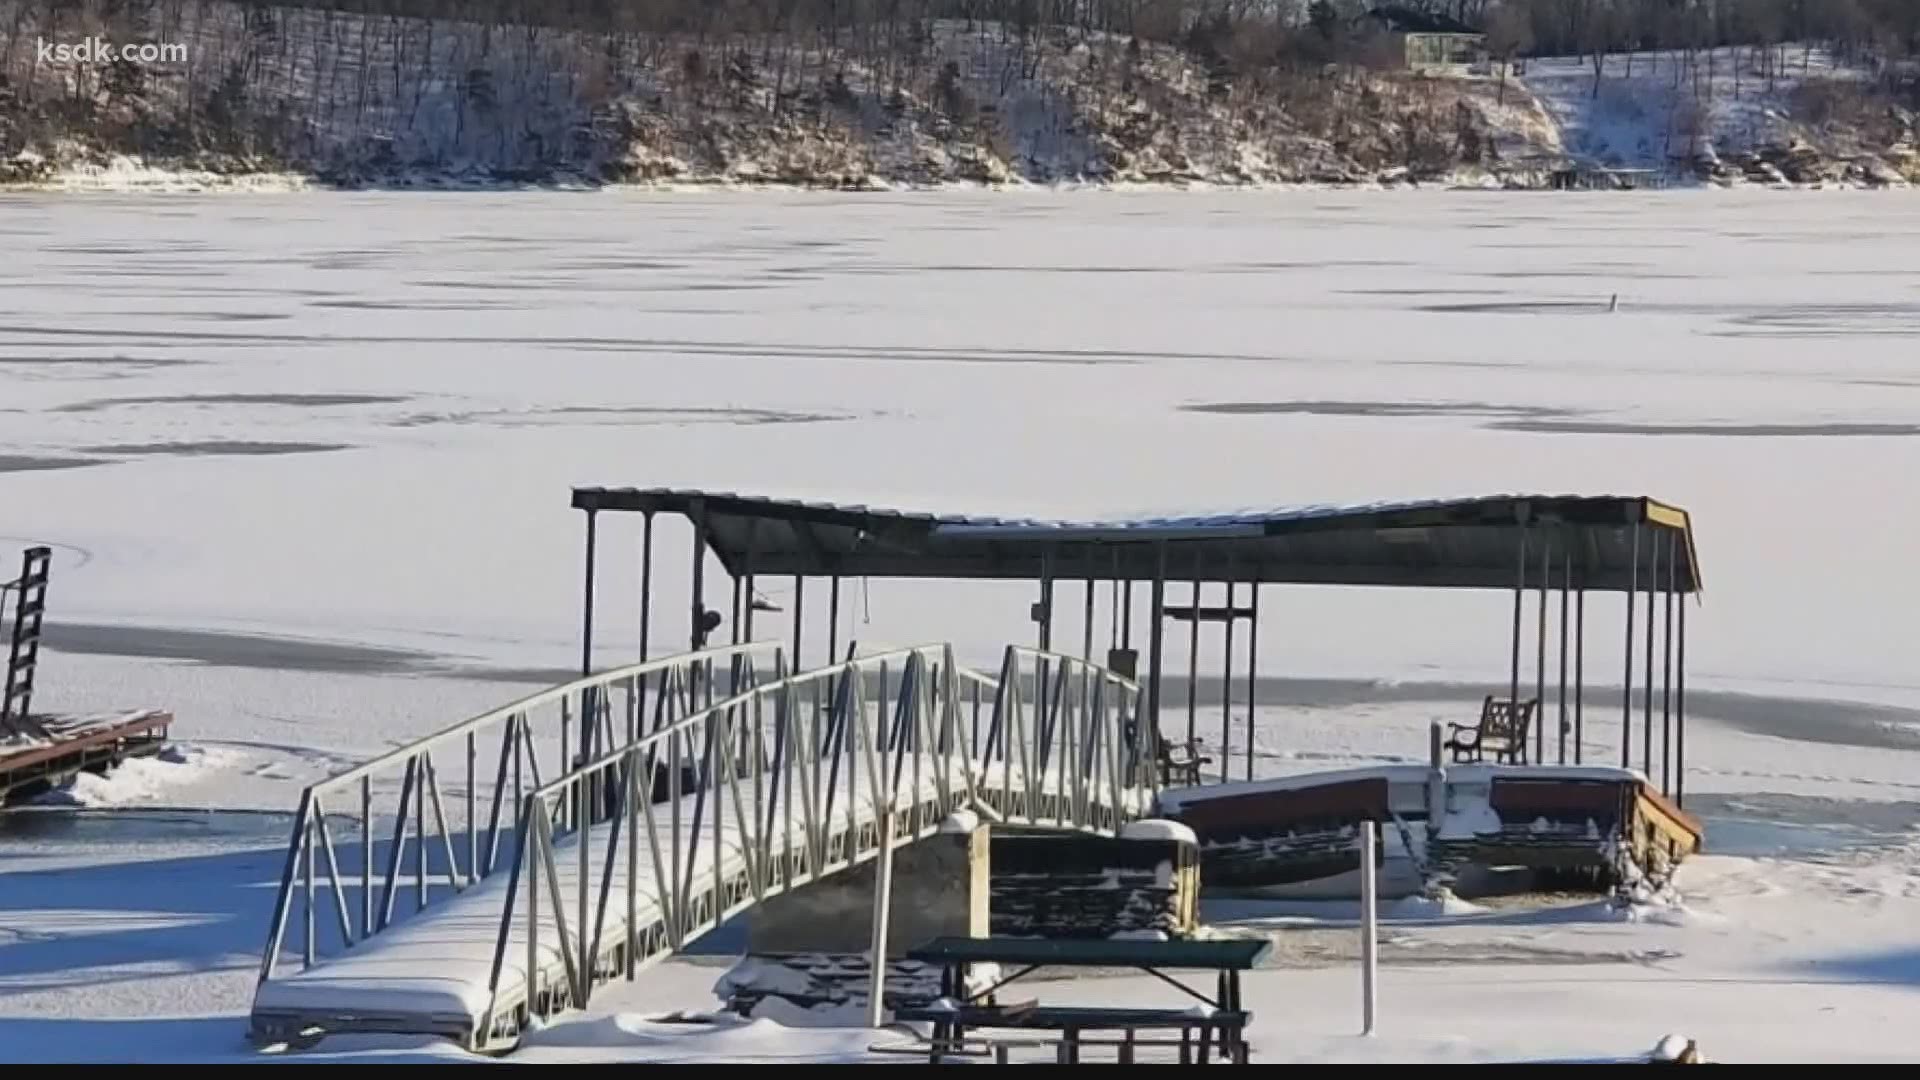 The lake froze during last week's arctic blast